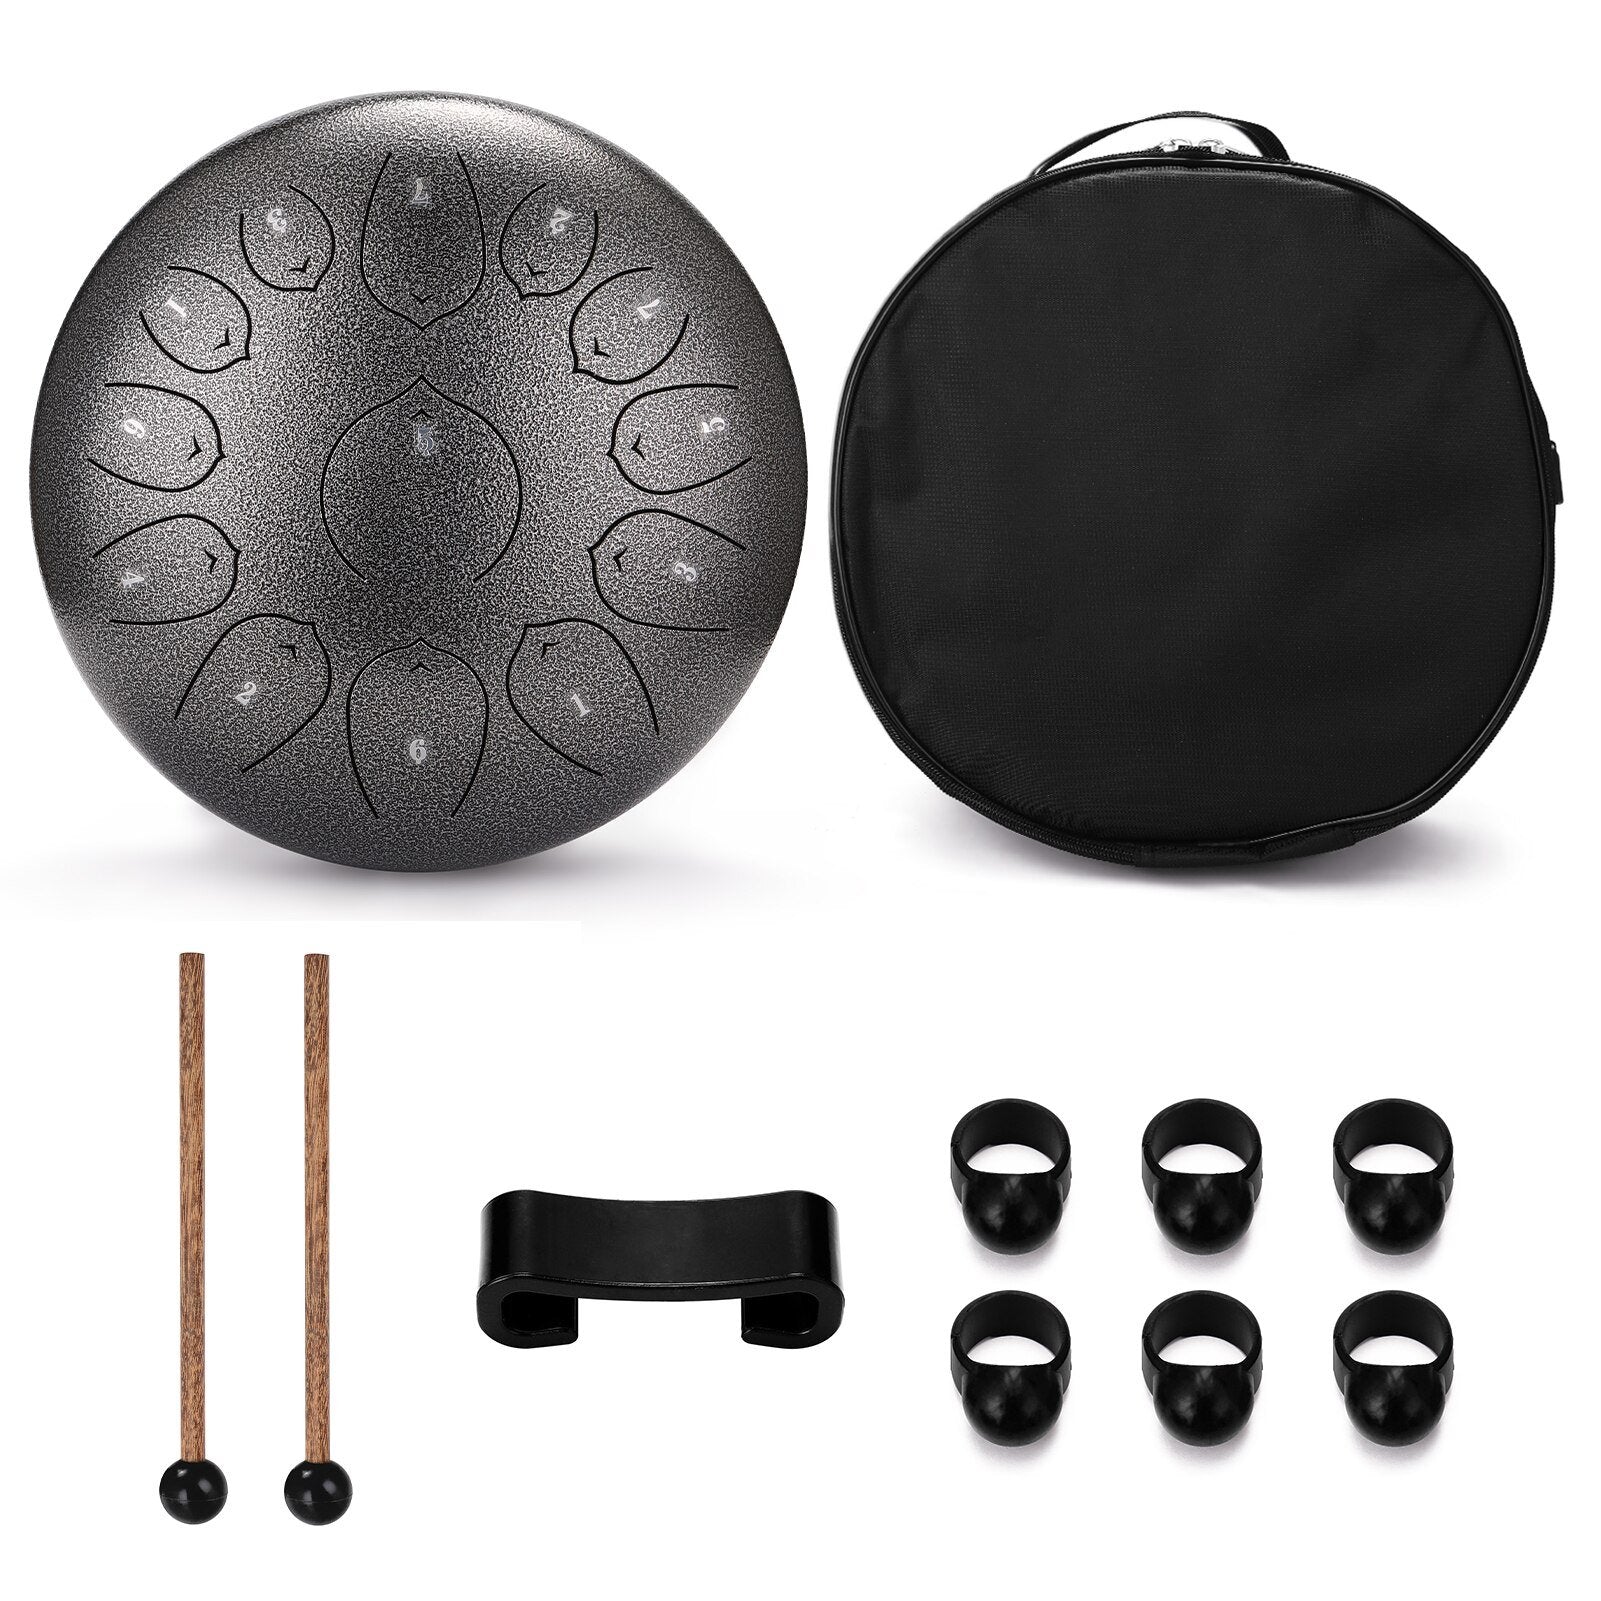 12 inch 13-Tone Steel Tongue Drum Mini Hand Pan Drums with Drumsticks Protable Percussion Instruments for yoga practice - AKLOT